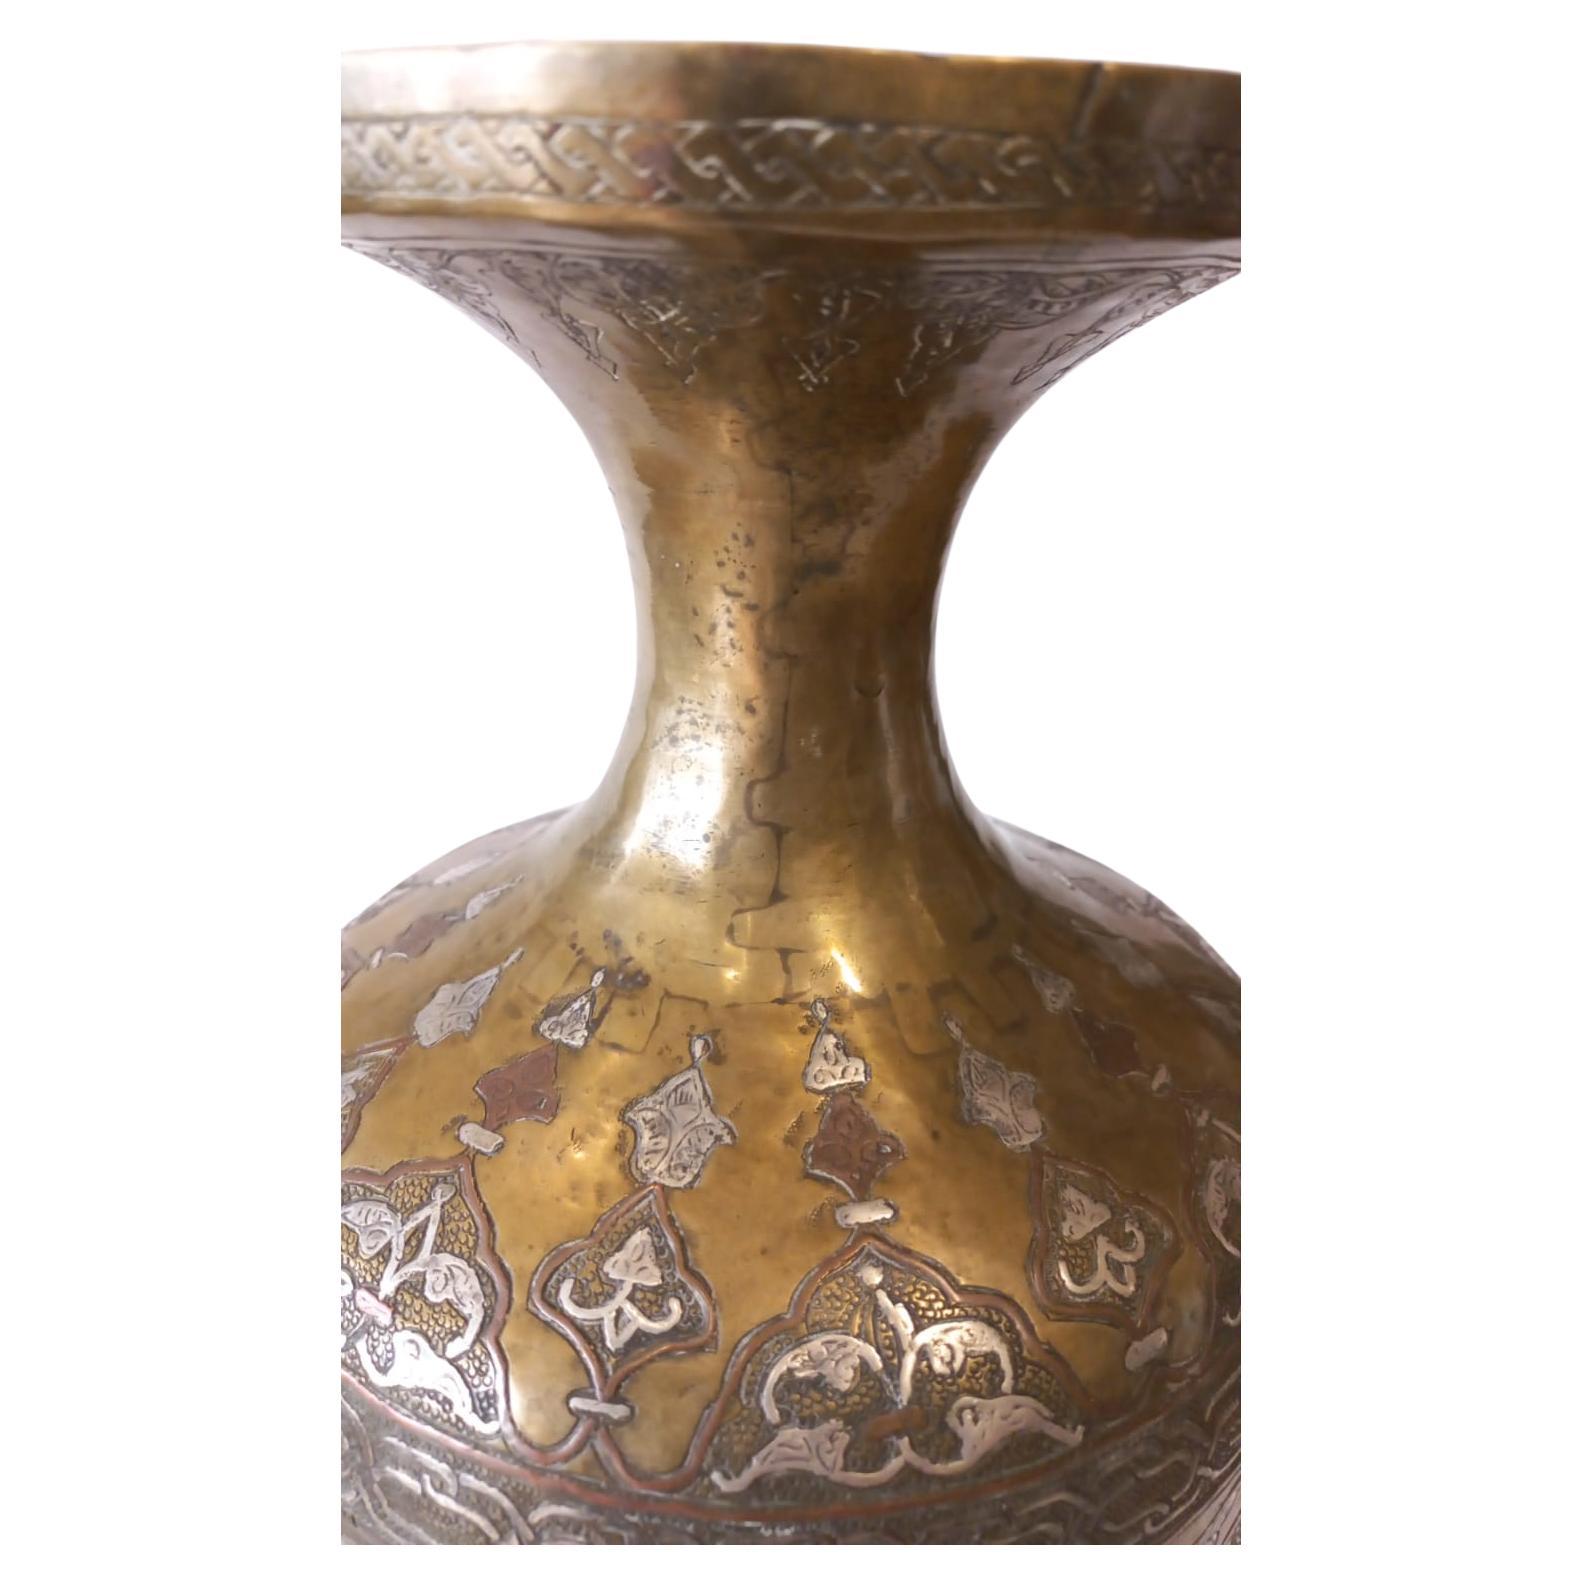 Antique Persian Islamic Brass Vase with Silver Inlay 19th Century For Sale 1